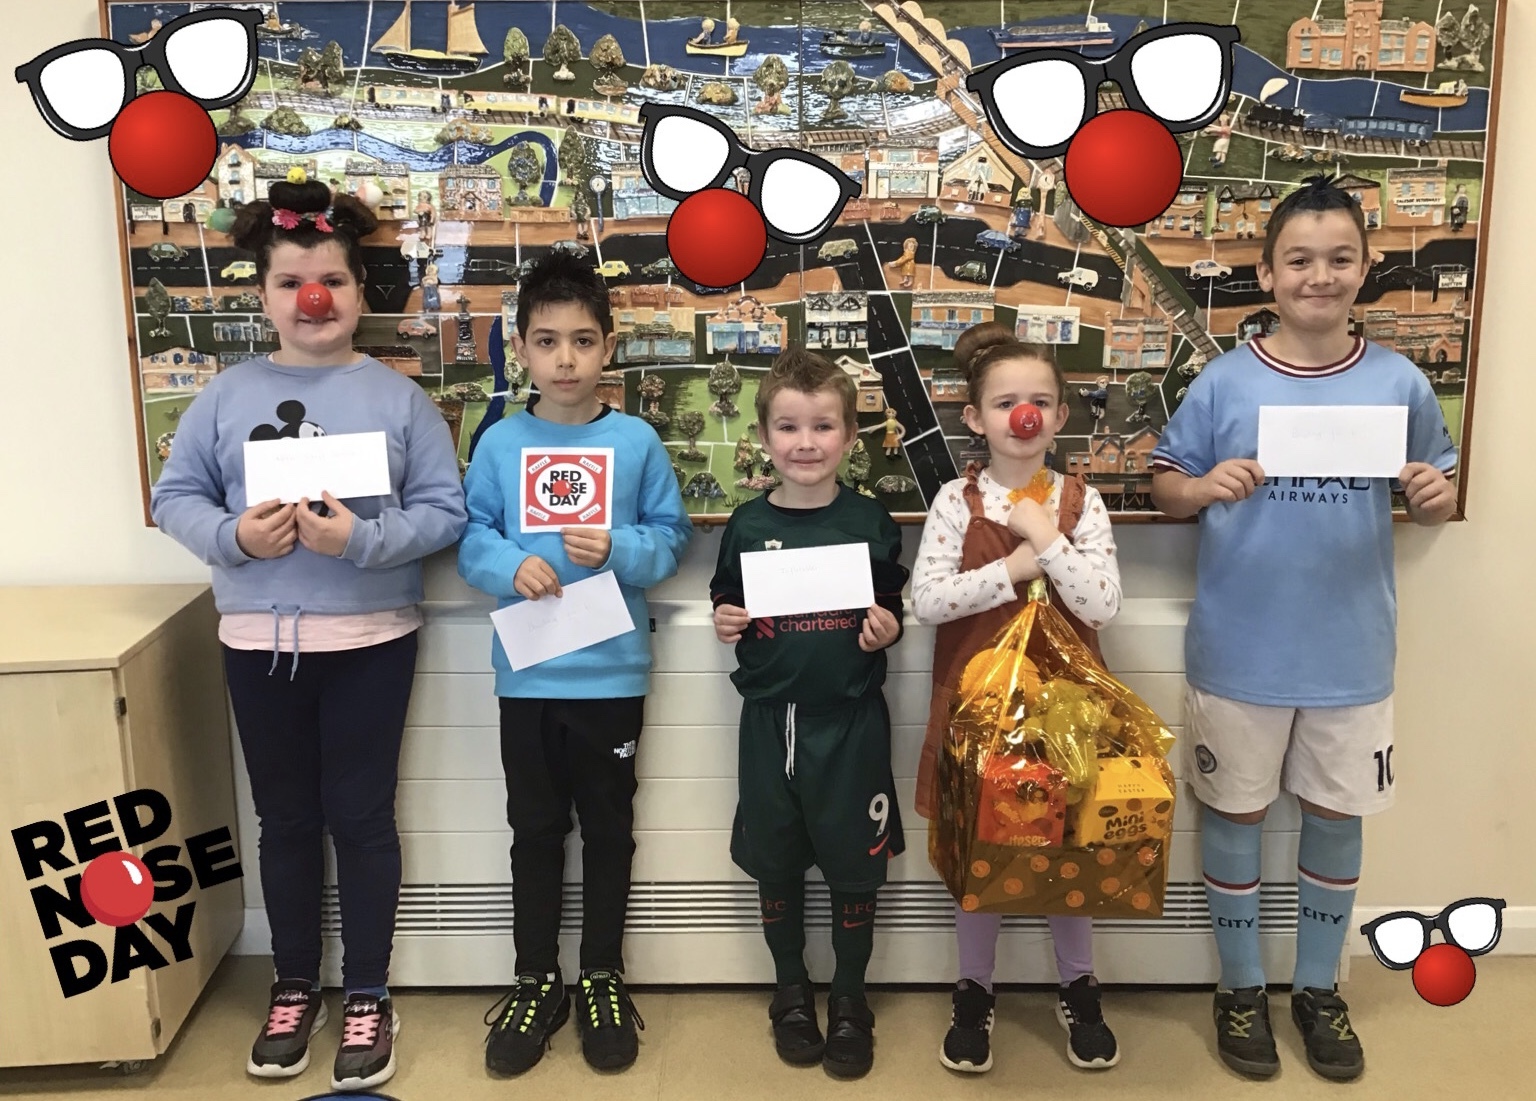 Ysgol Ty Ffynnon Red Nose raffle winners - Daisy, Niclaus, Michael, Alecia and Ervin.